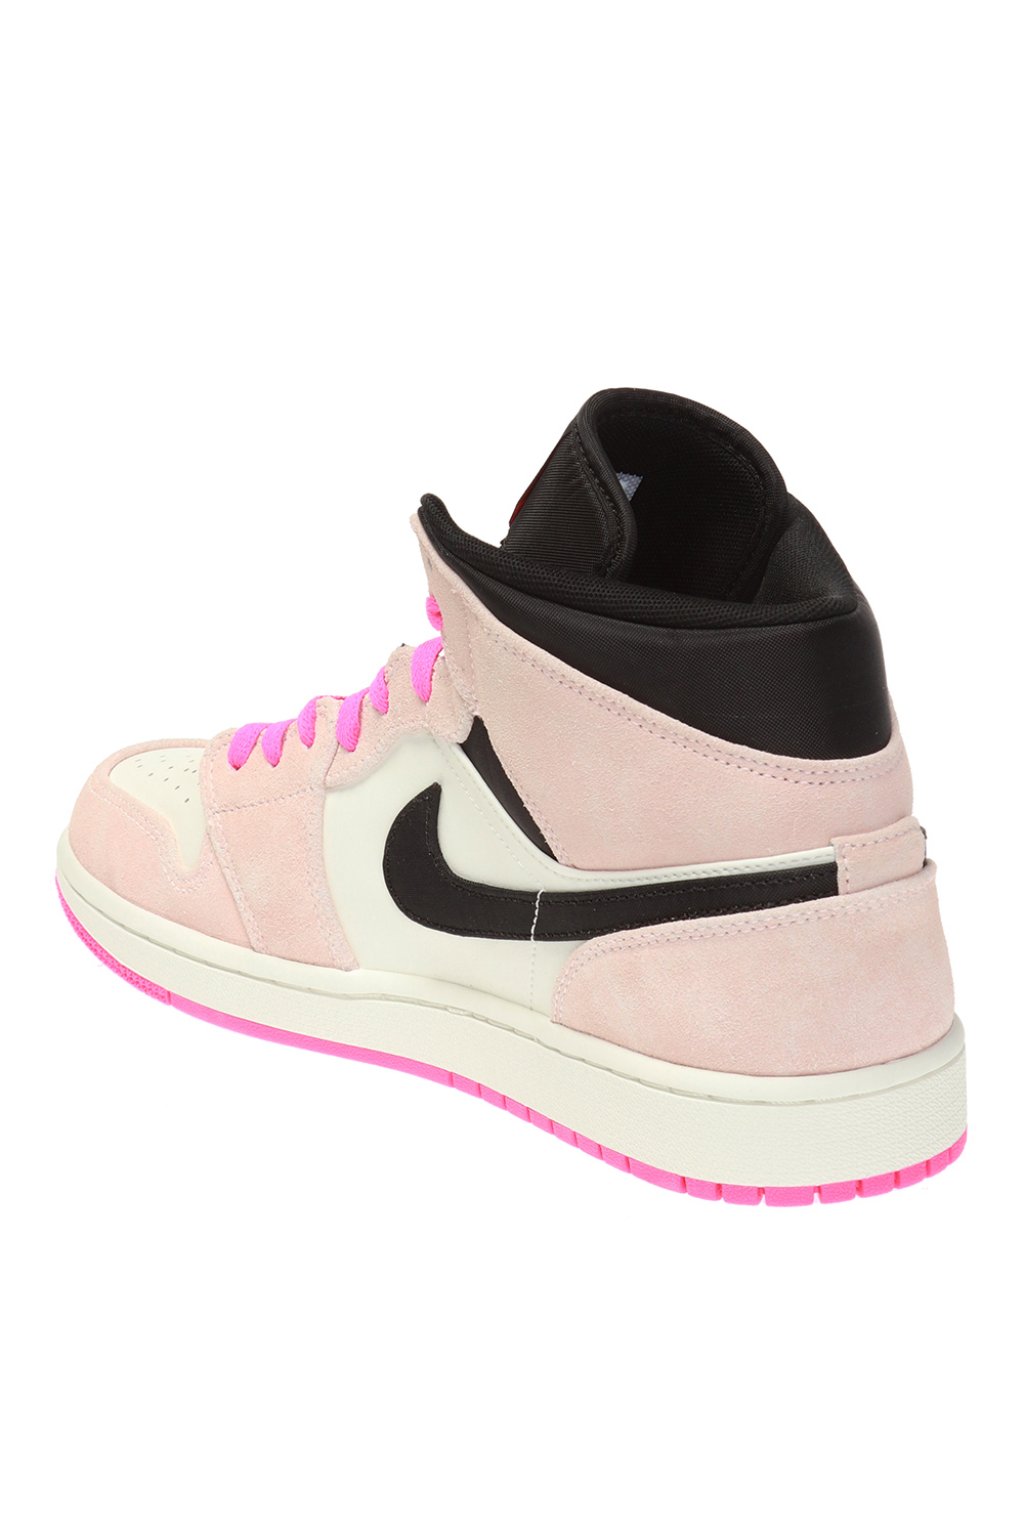 pink and black nike high tops